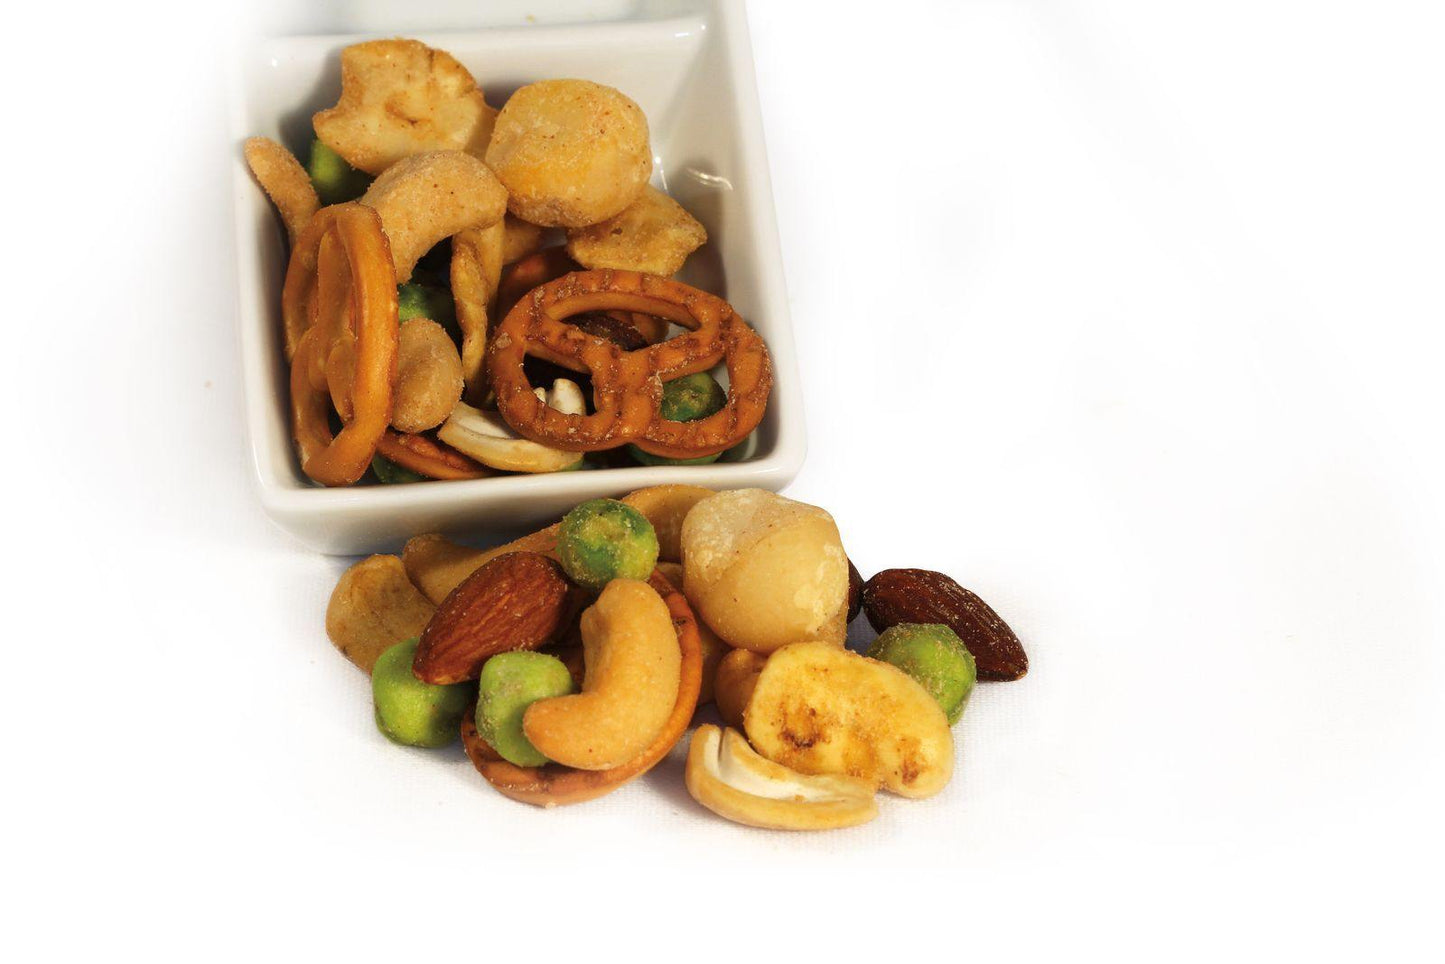 Babylon Mix - The Dormen Food Company. A picture of a small dish containing Babylon Mix from The Dormen Food Company, shows a few Pretzels, Macadamia nuts, wasabi peas, cashews and almonds. 